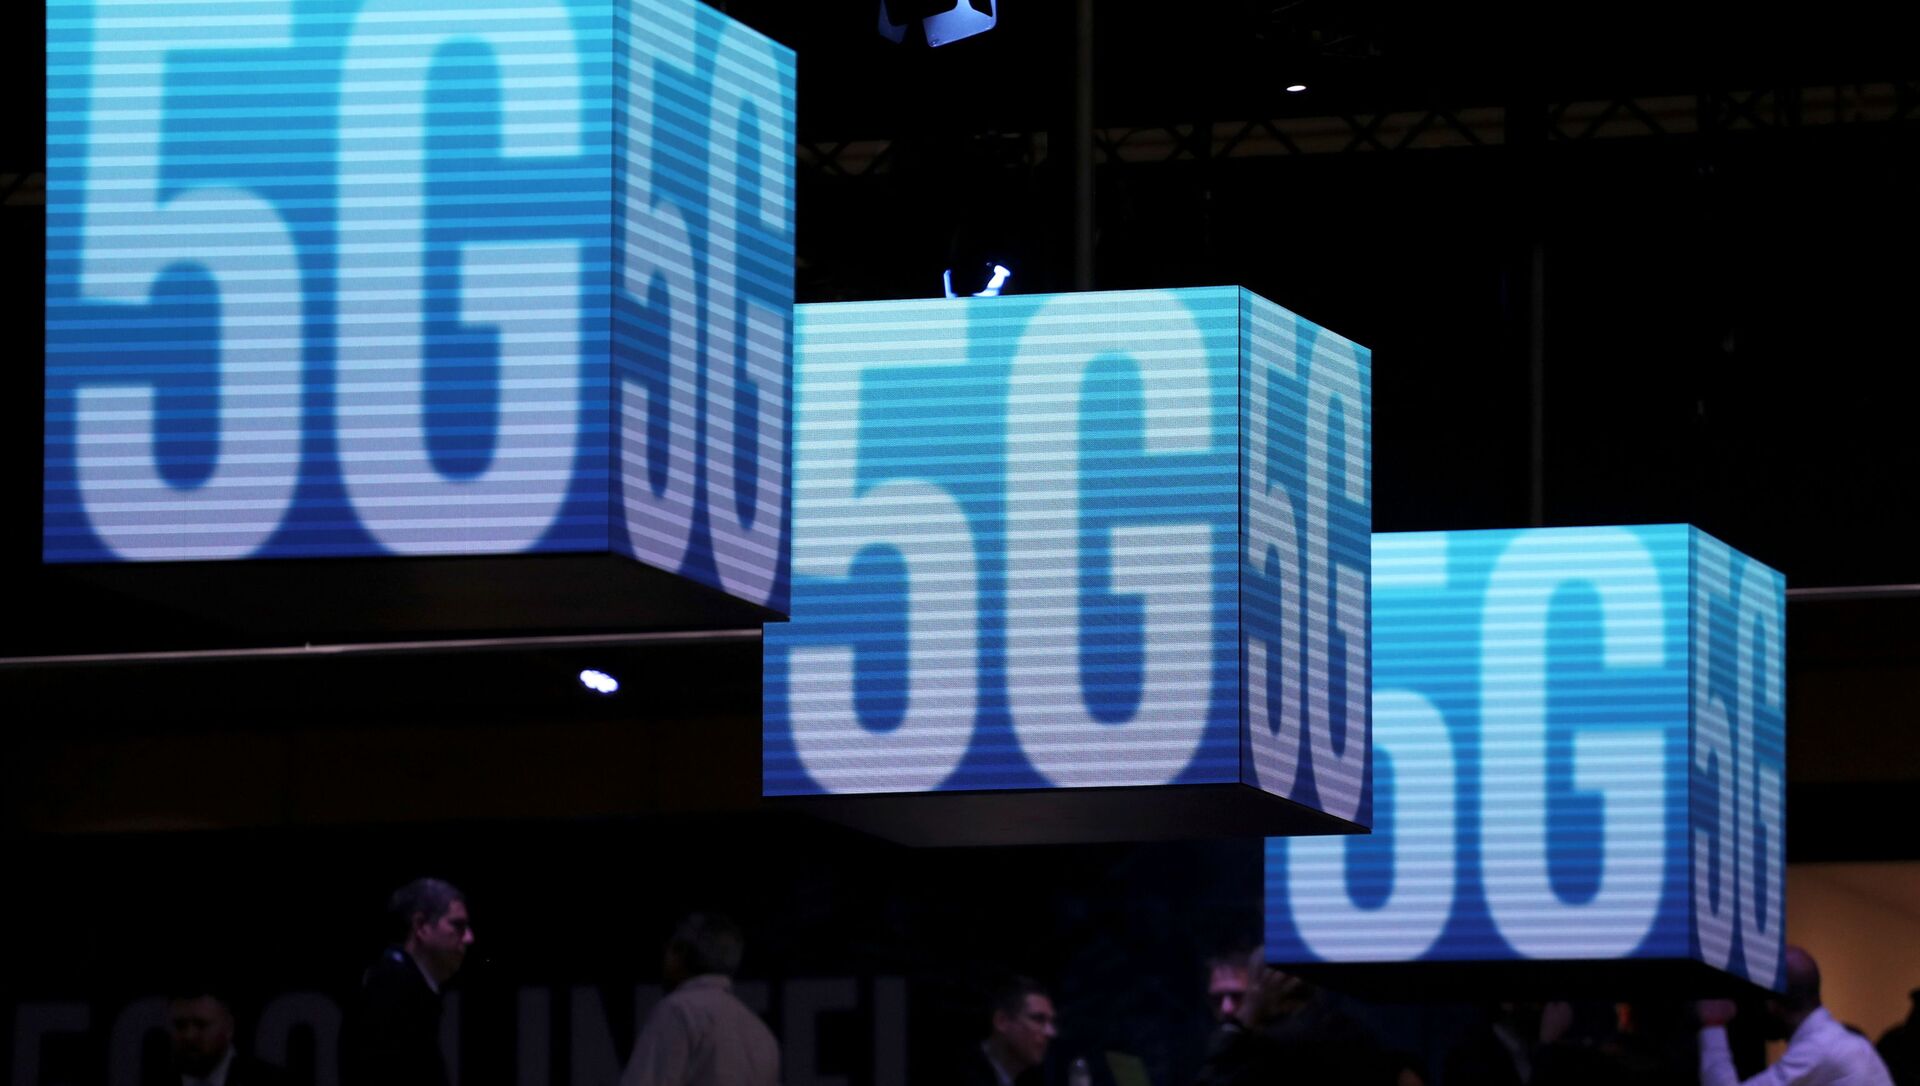 Hanging cubes display 5G logos at the Mobile World Congress in Barcelona, Spain, February 26, 2019. REUTERS/Sergio Perez/File Photo - Sputnik International, 1920, 10.05.2021